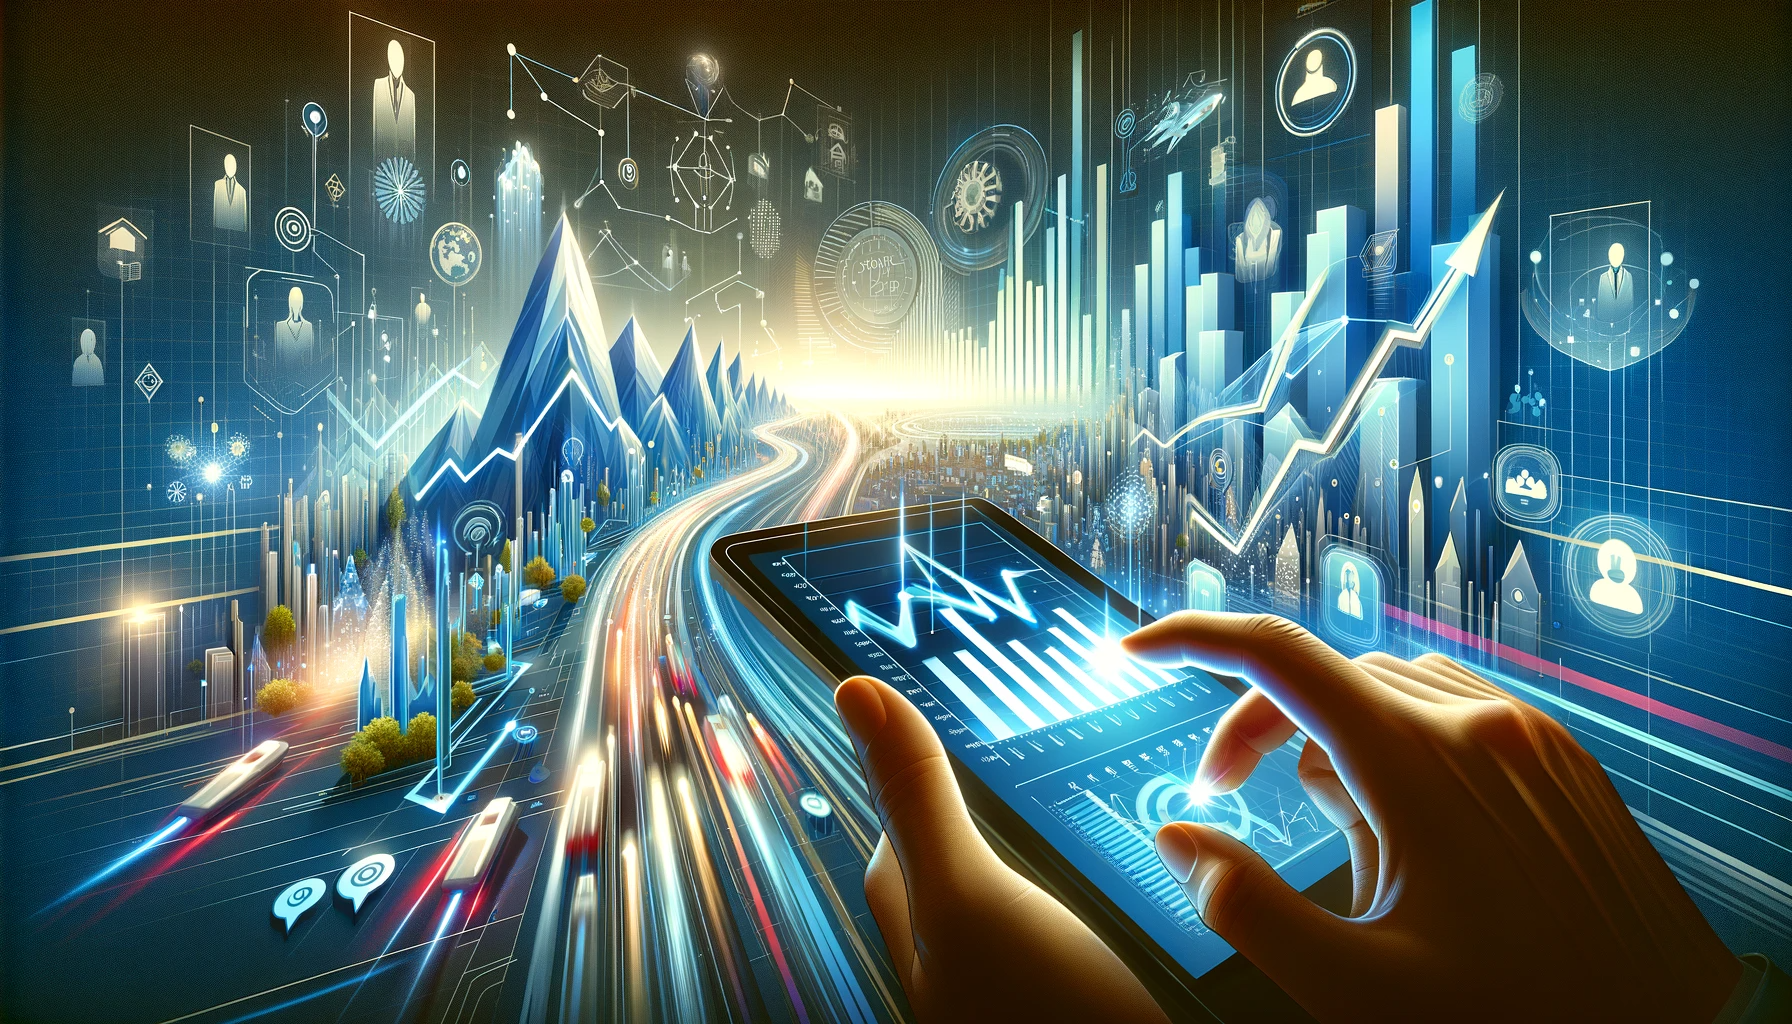 Futuristic illustration of a hand interacting with a tablet showing dynamic financial graphs, amidst a vivid landscape with digital elements, icons, and holographic projections symbolizing connectivity and analytics.